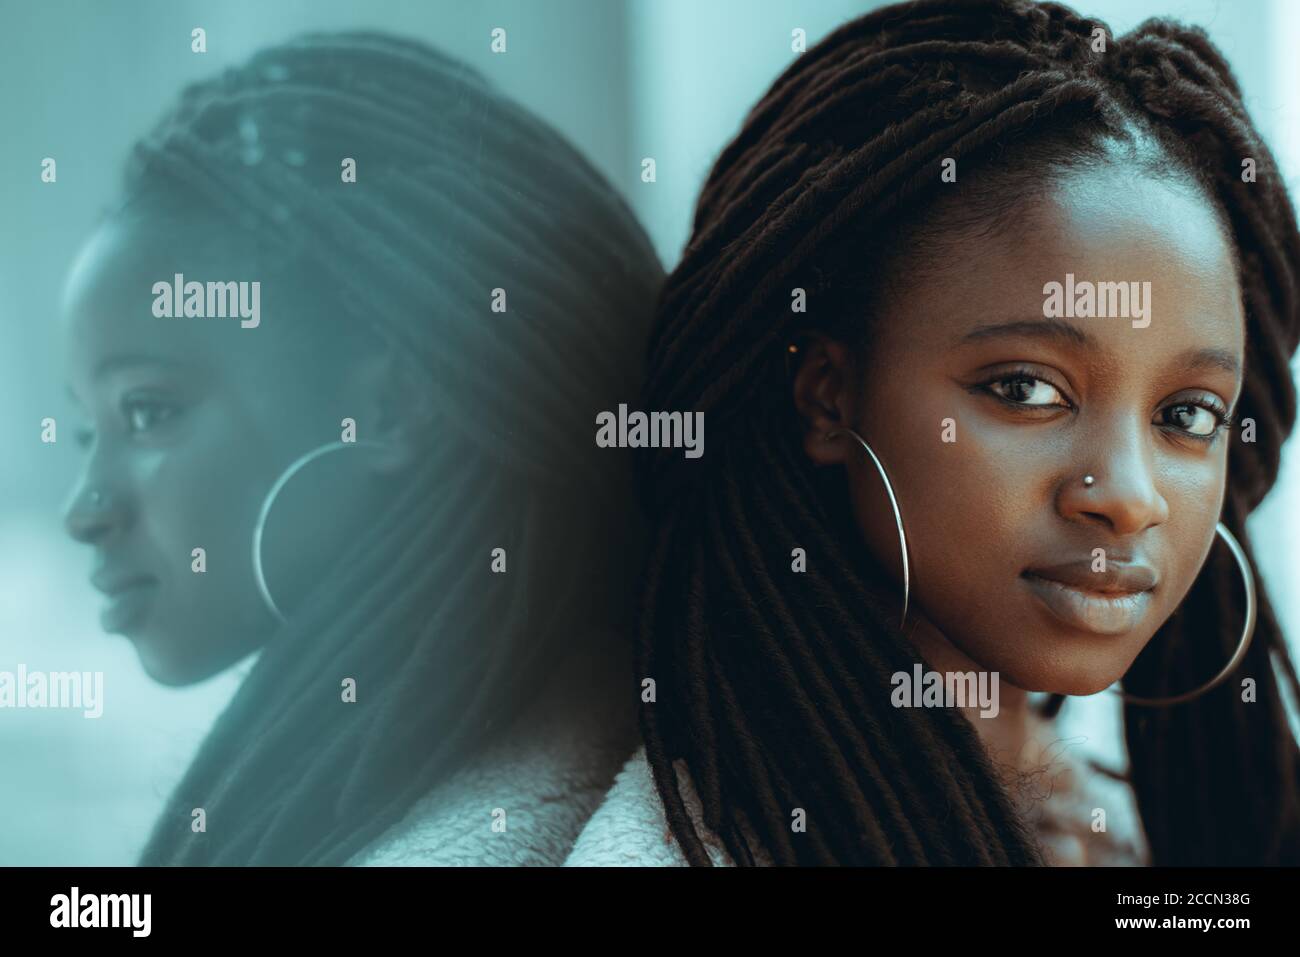 A portrait of admirable young black female from Guinea-Bissau with big earrings, nose piercing, and braided hair, she is leaning against glass wall Stock Photo